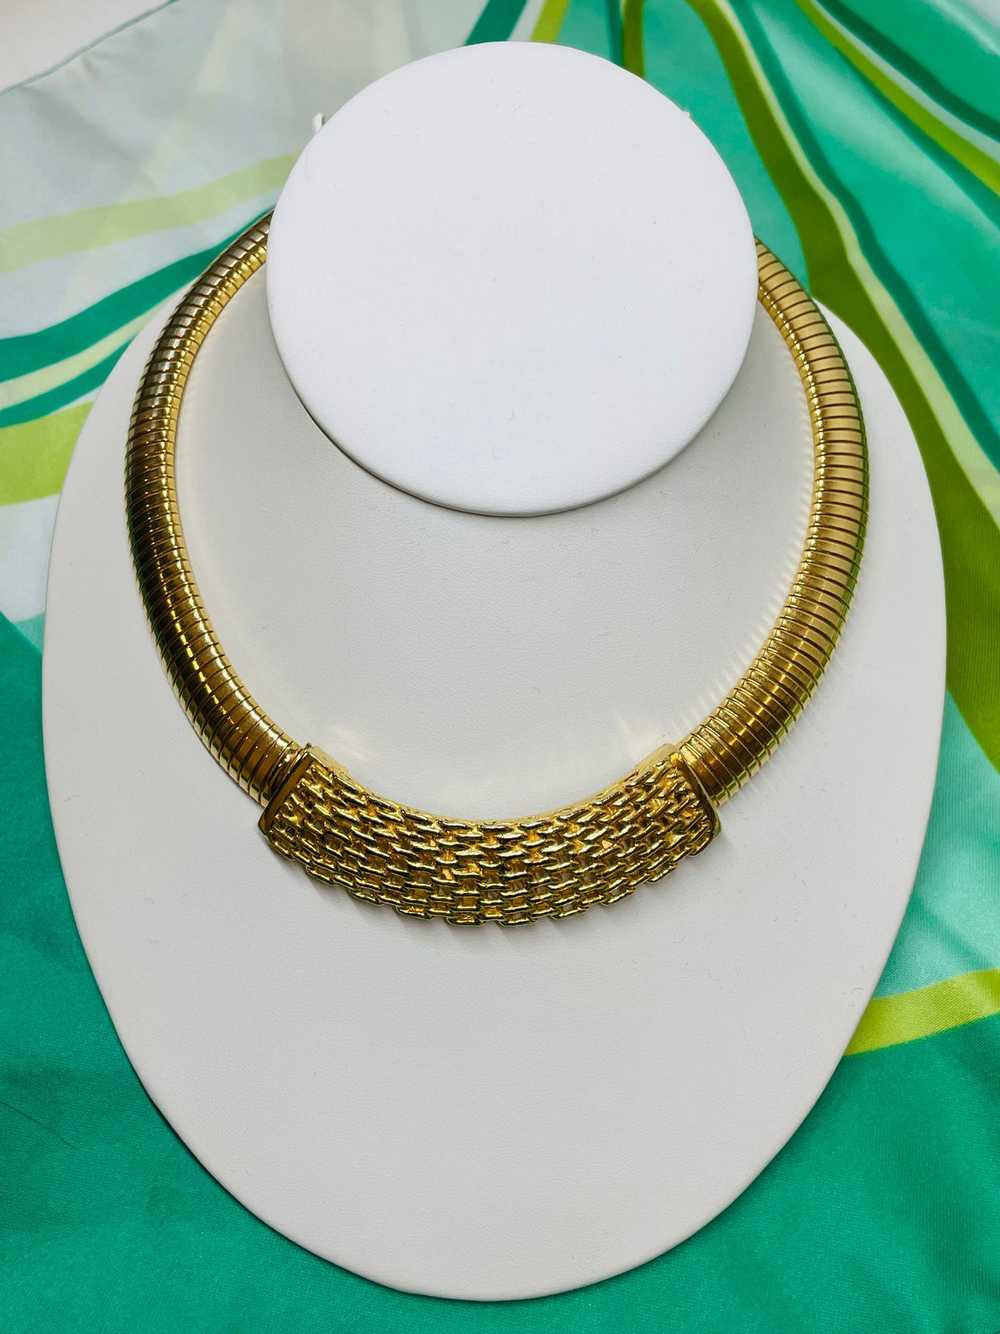 1980’s Gold Textured Omega Necklace - image 1